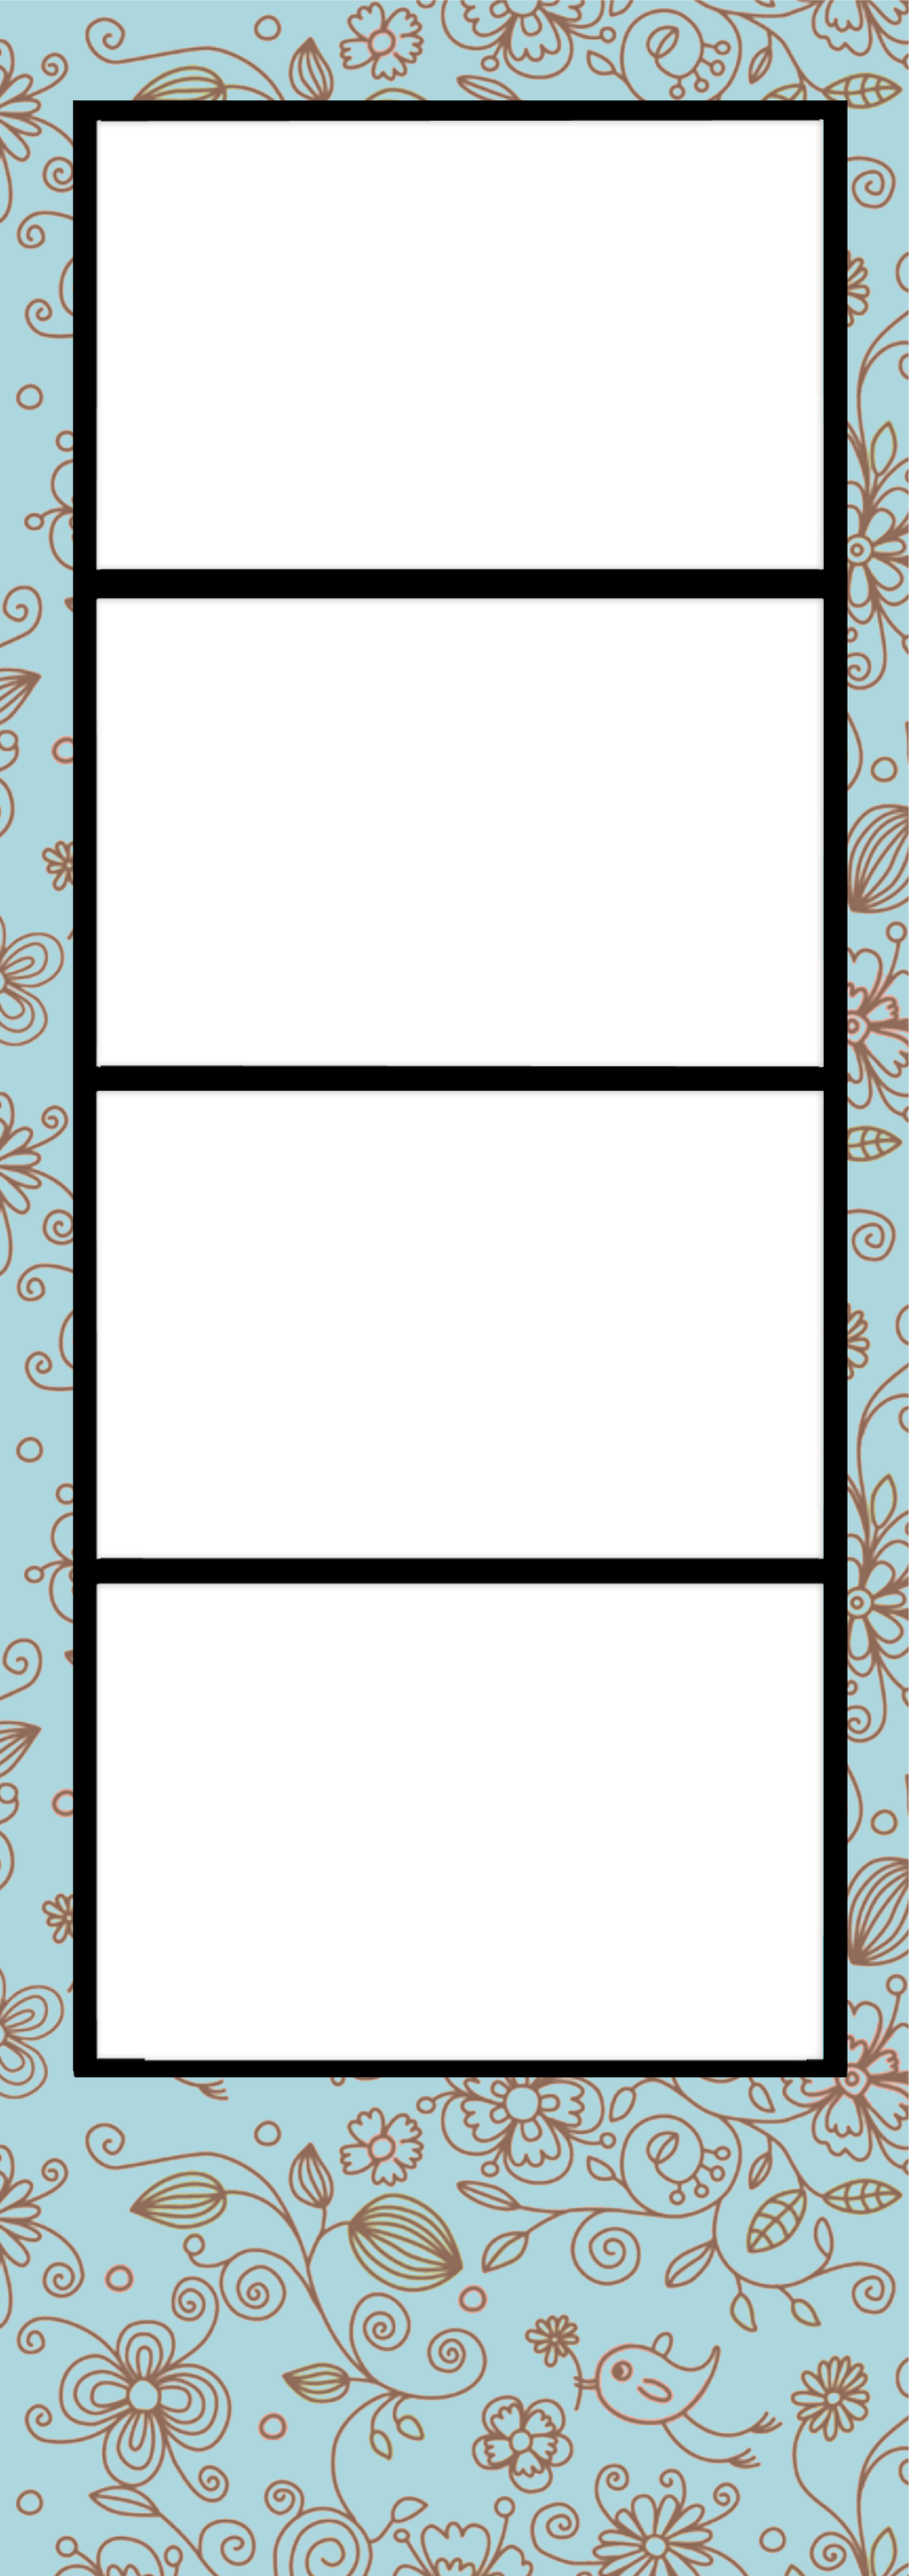 Photo Booth Template by BlissfuLLimaging on DeviantArt